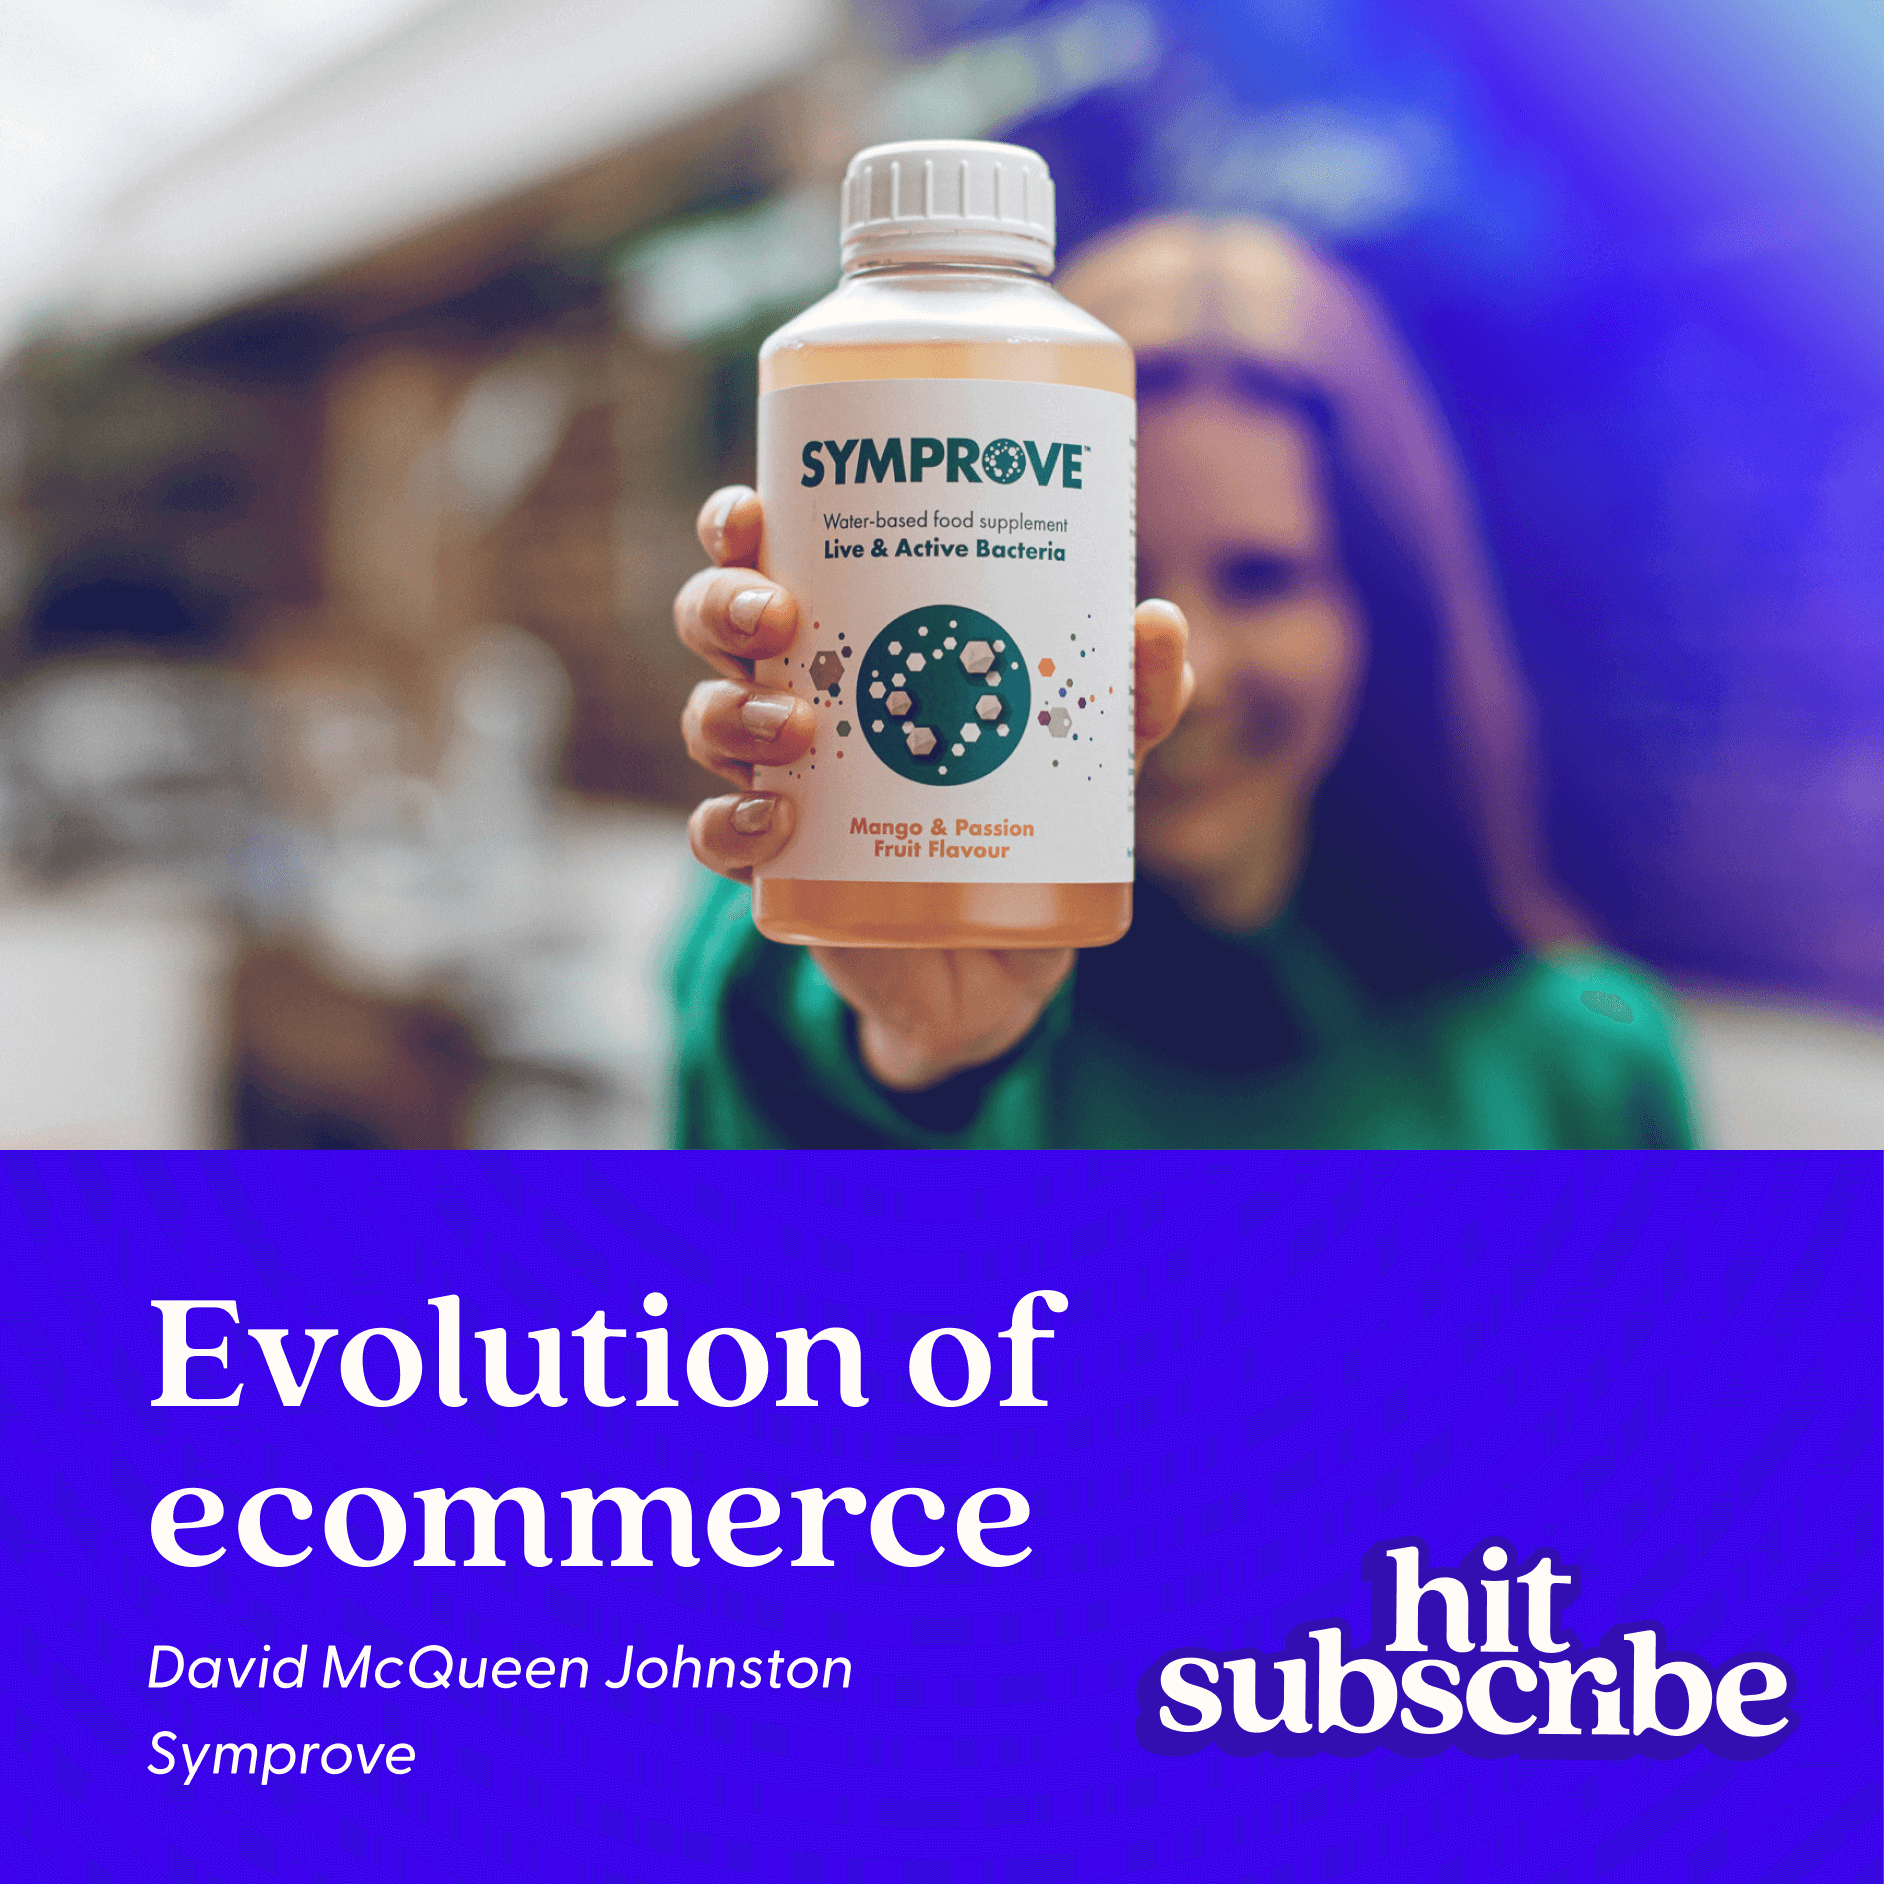 Evolution of ecommerce with David McQueen Johnston, Symprove Hit Subscribe podcast cover